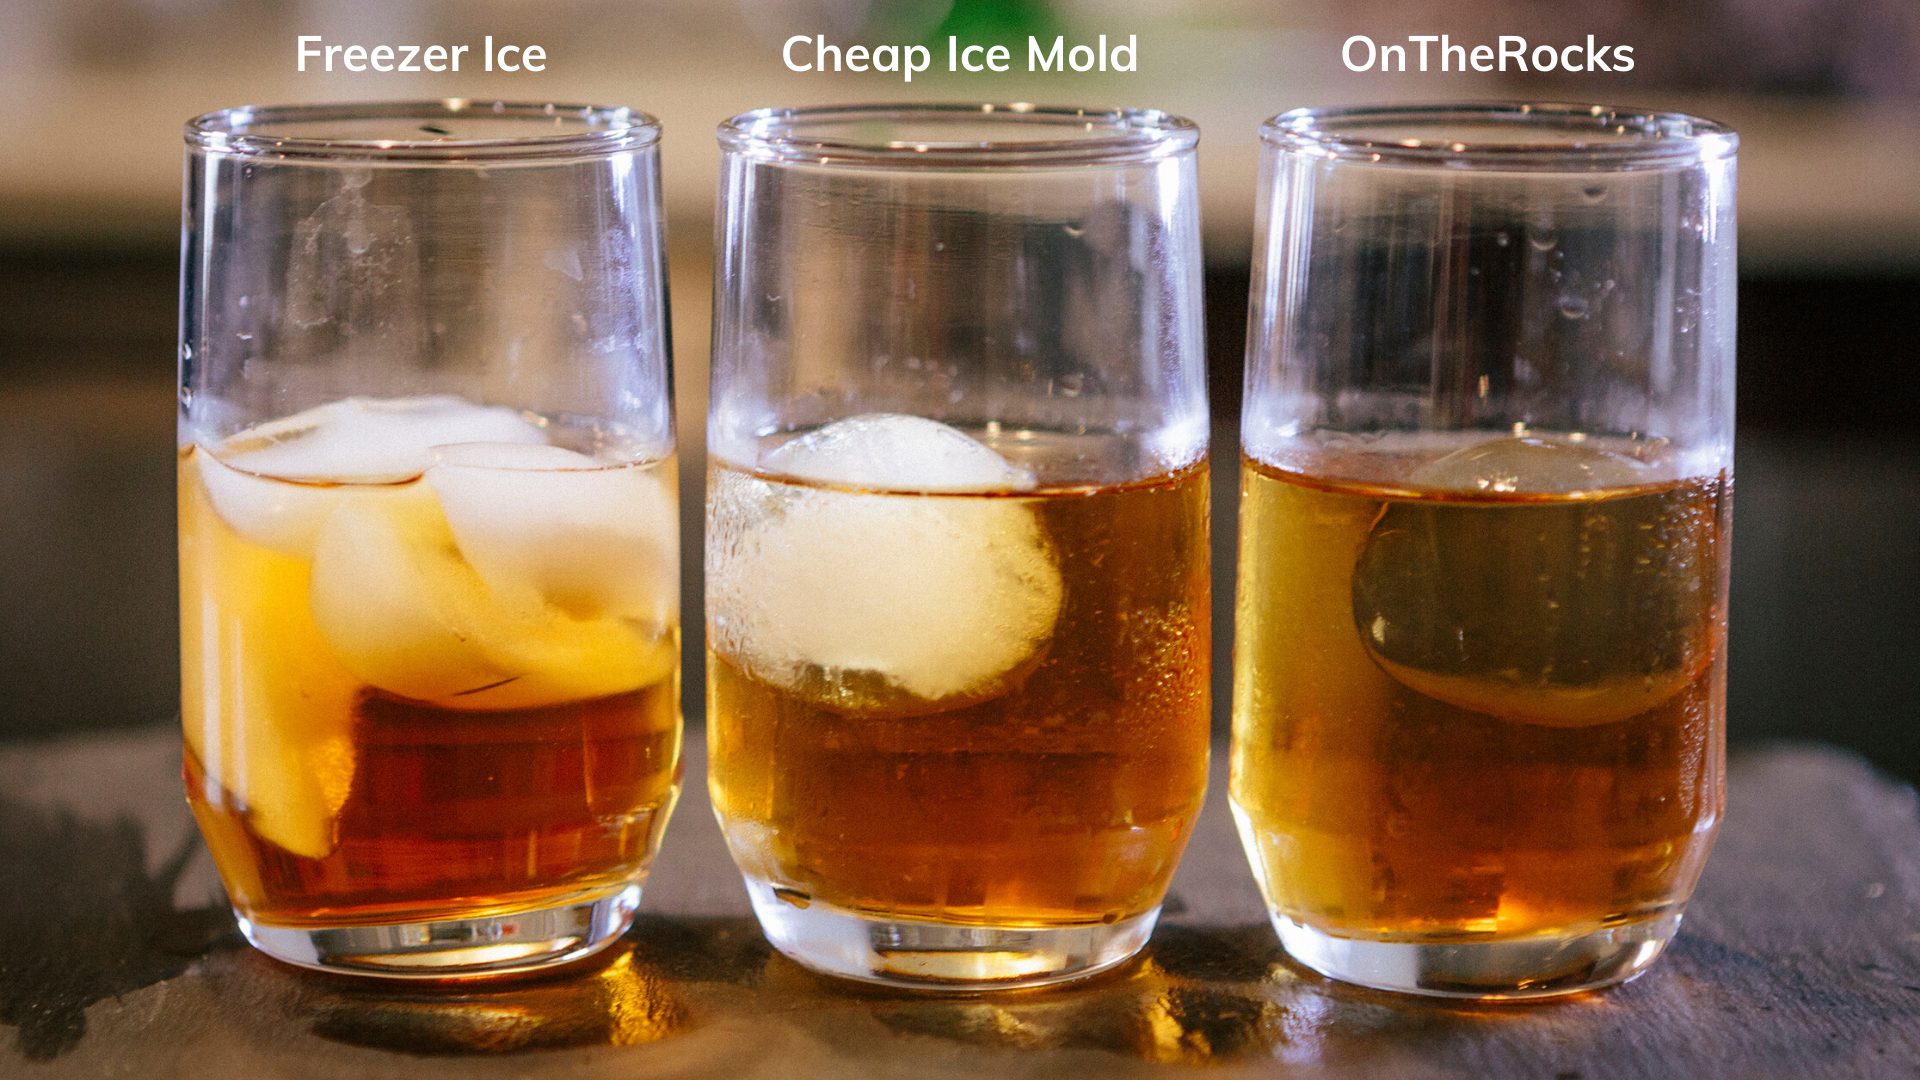 Examples of cloudy freezer ice compared to perfectly clear ice spheres made by the OnTheRocks Ice Box